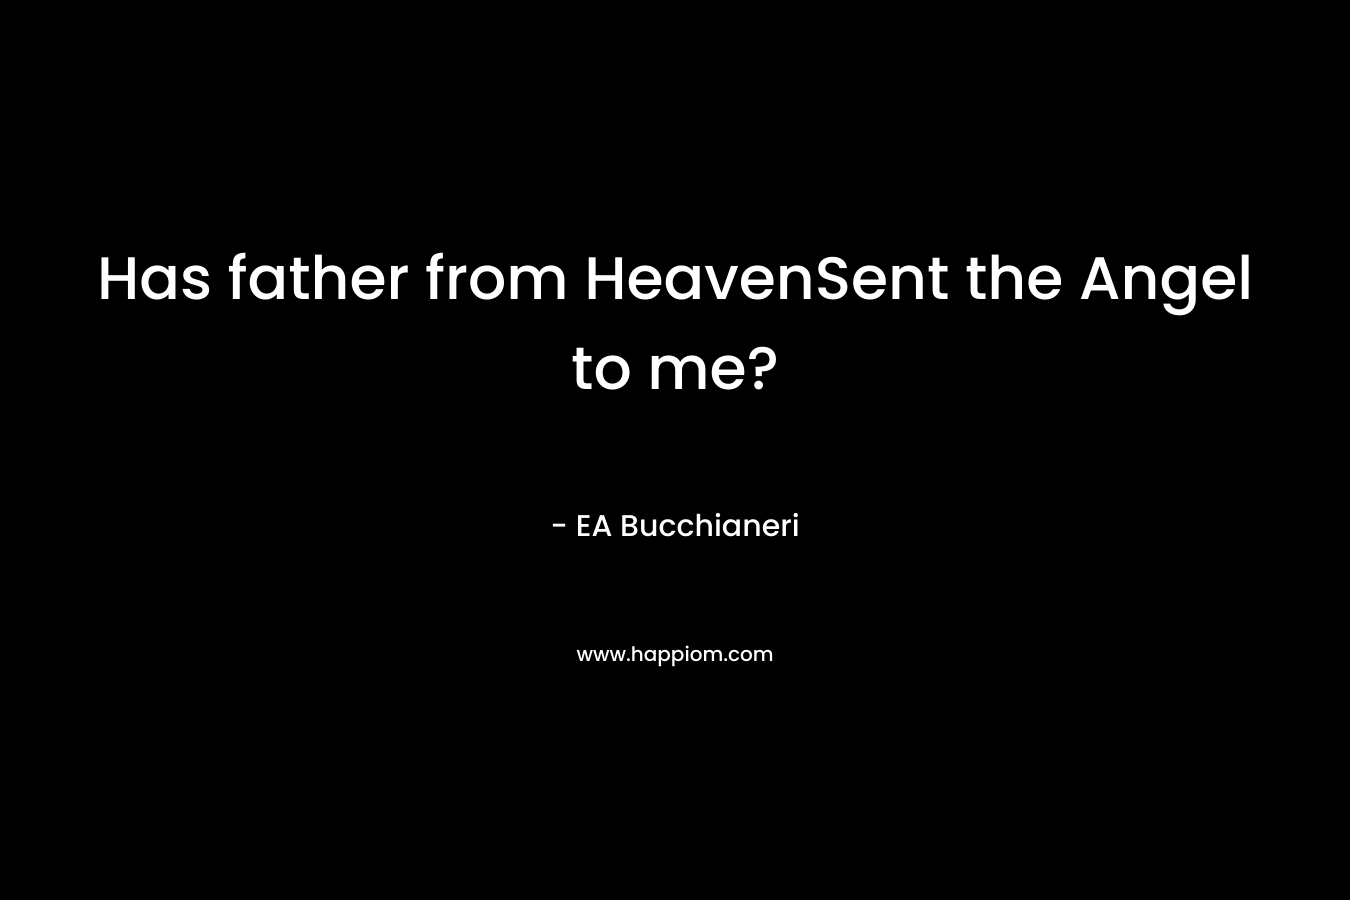 Has father from HeavenSent the Angel to me? – EA Bucchianeri